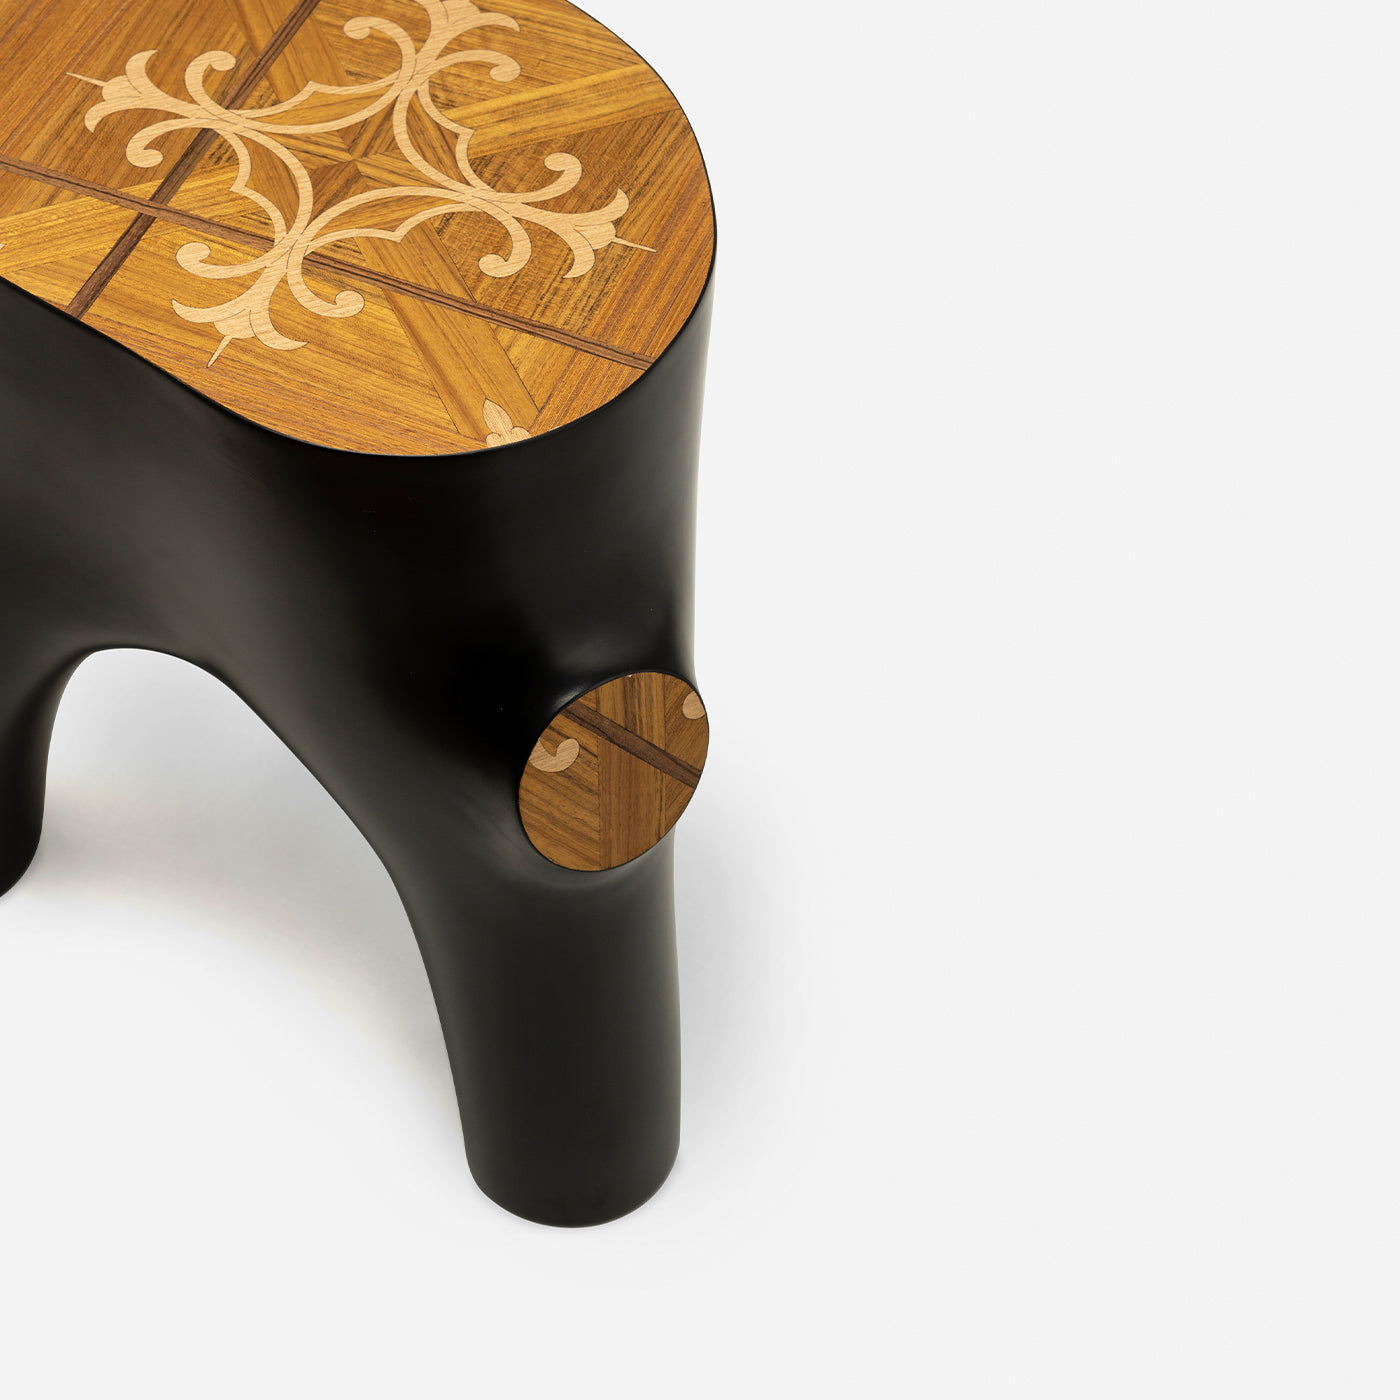 Stump Side Table by Marcantonio - Alternative view 3